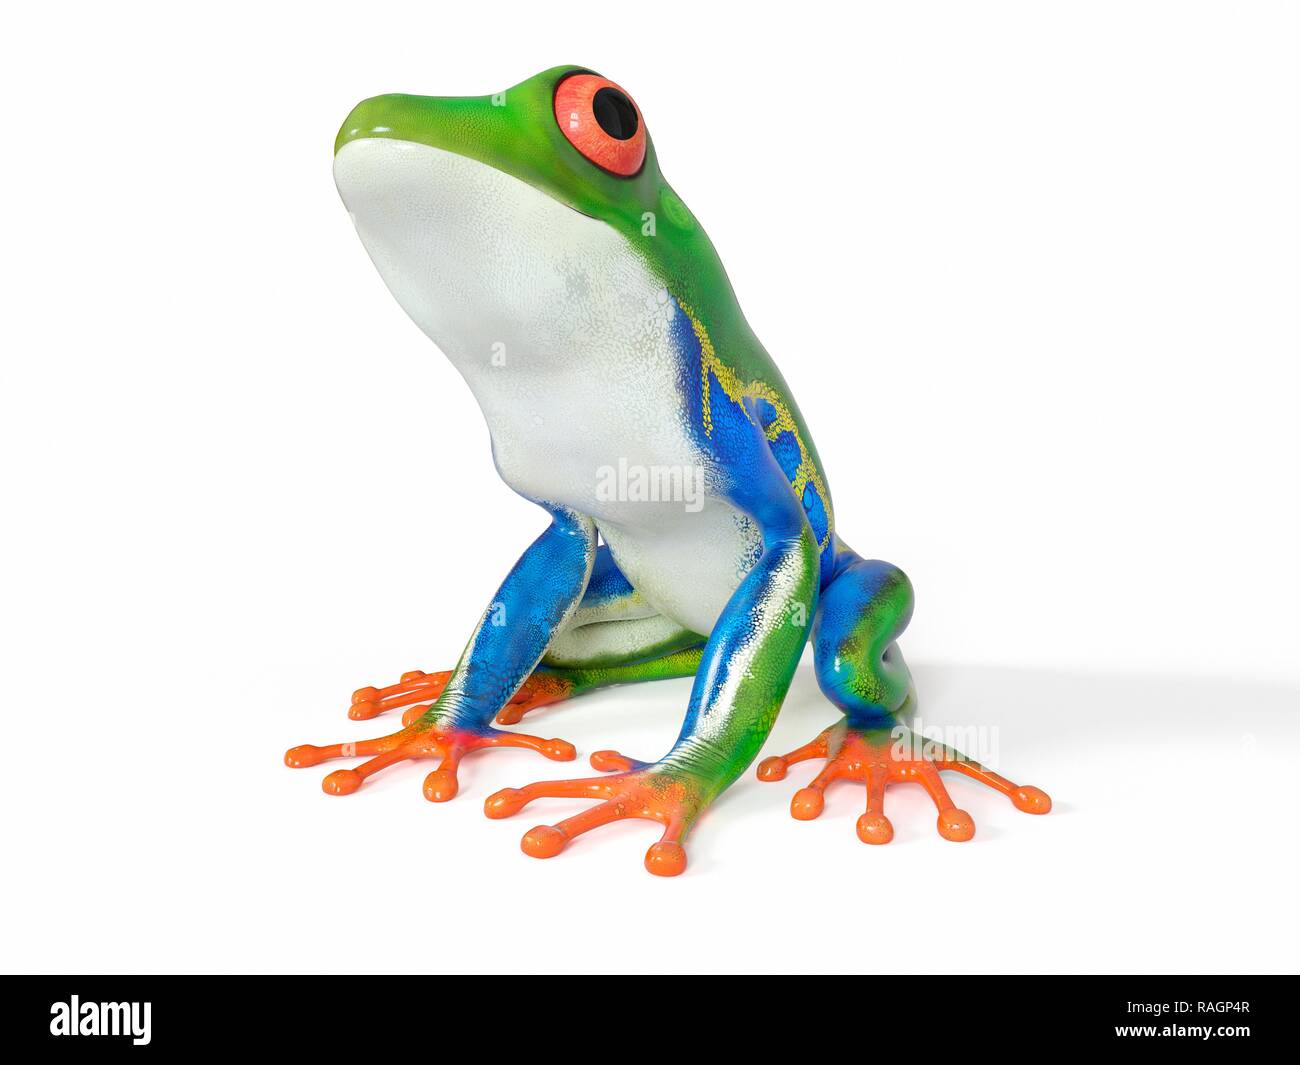 1,230 Realistic Frog Images, Stock Photos, 3D objects, & Vectors